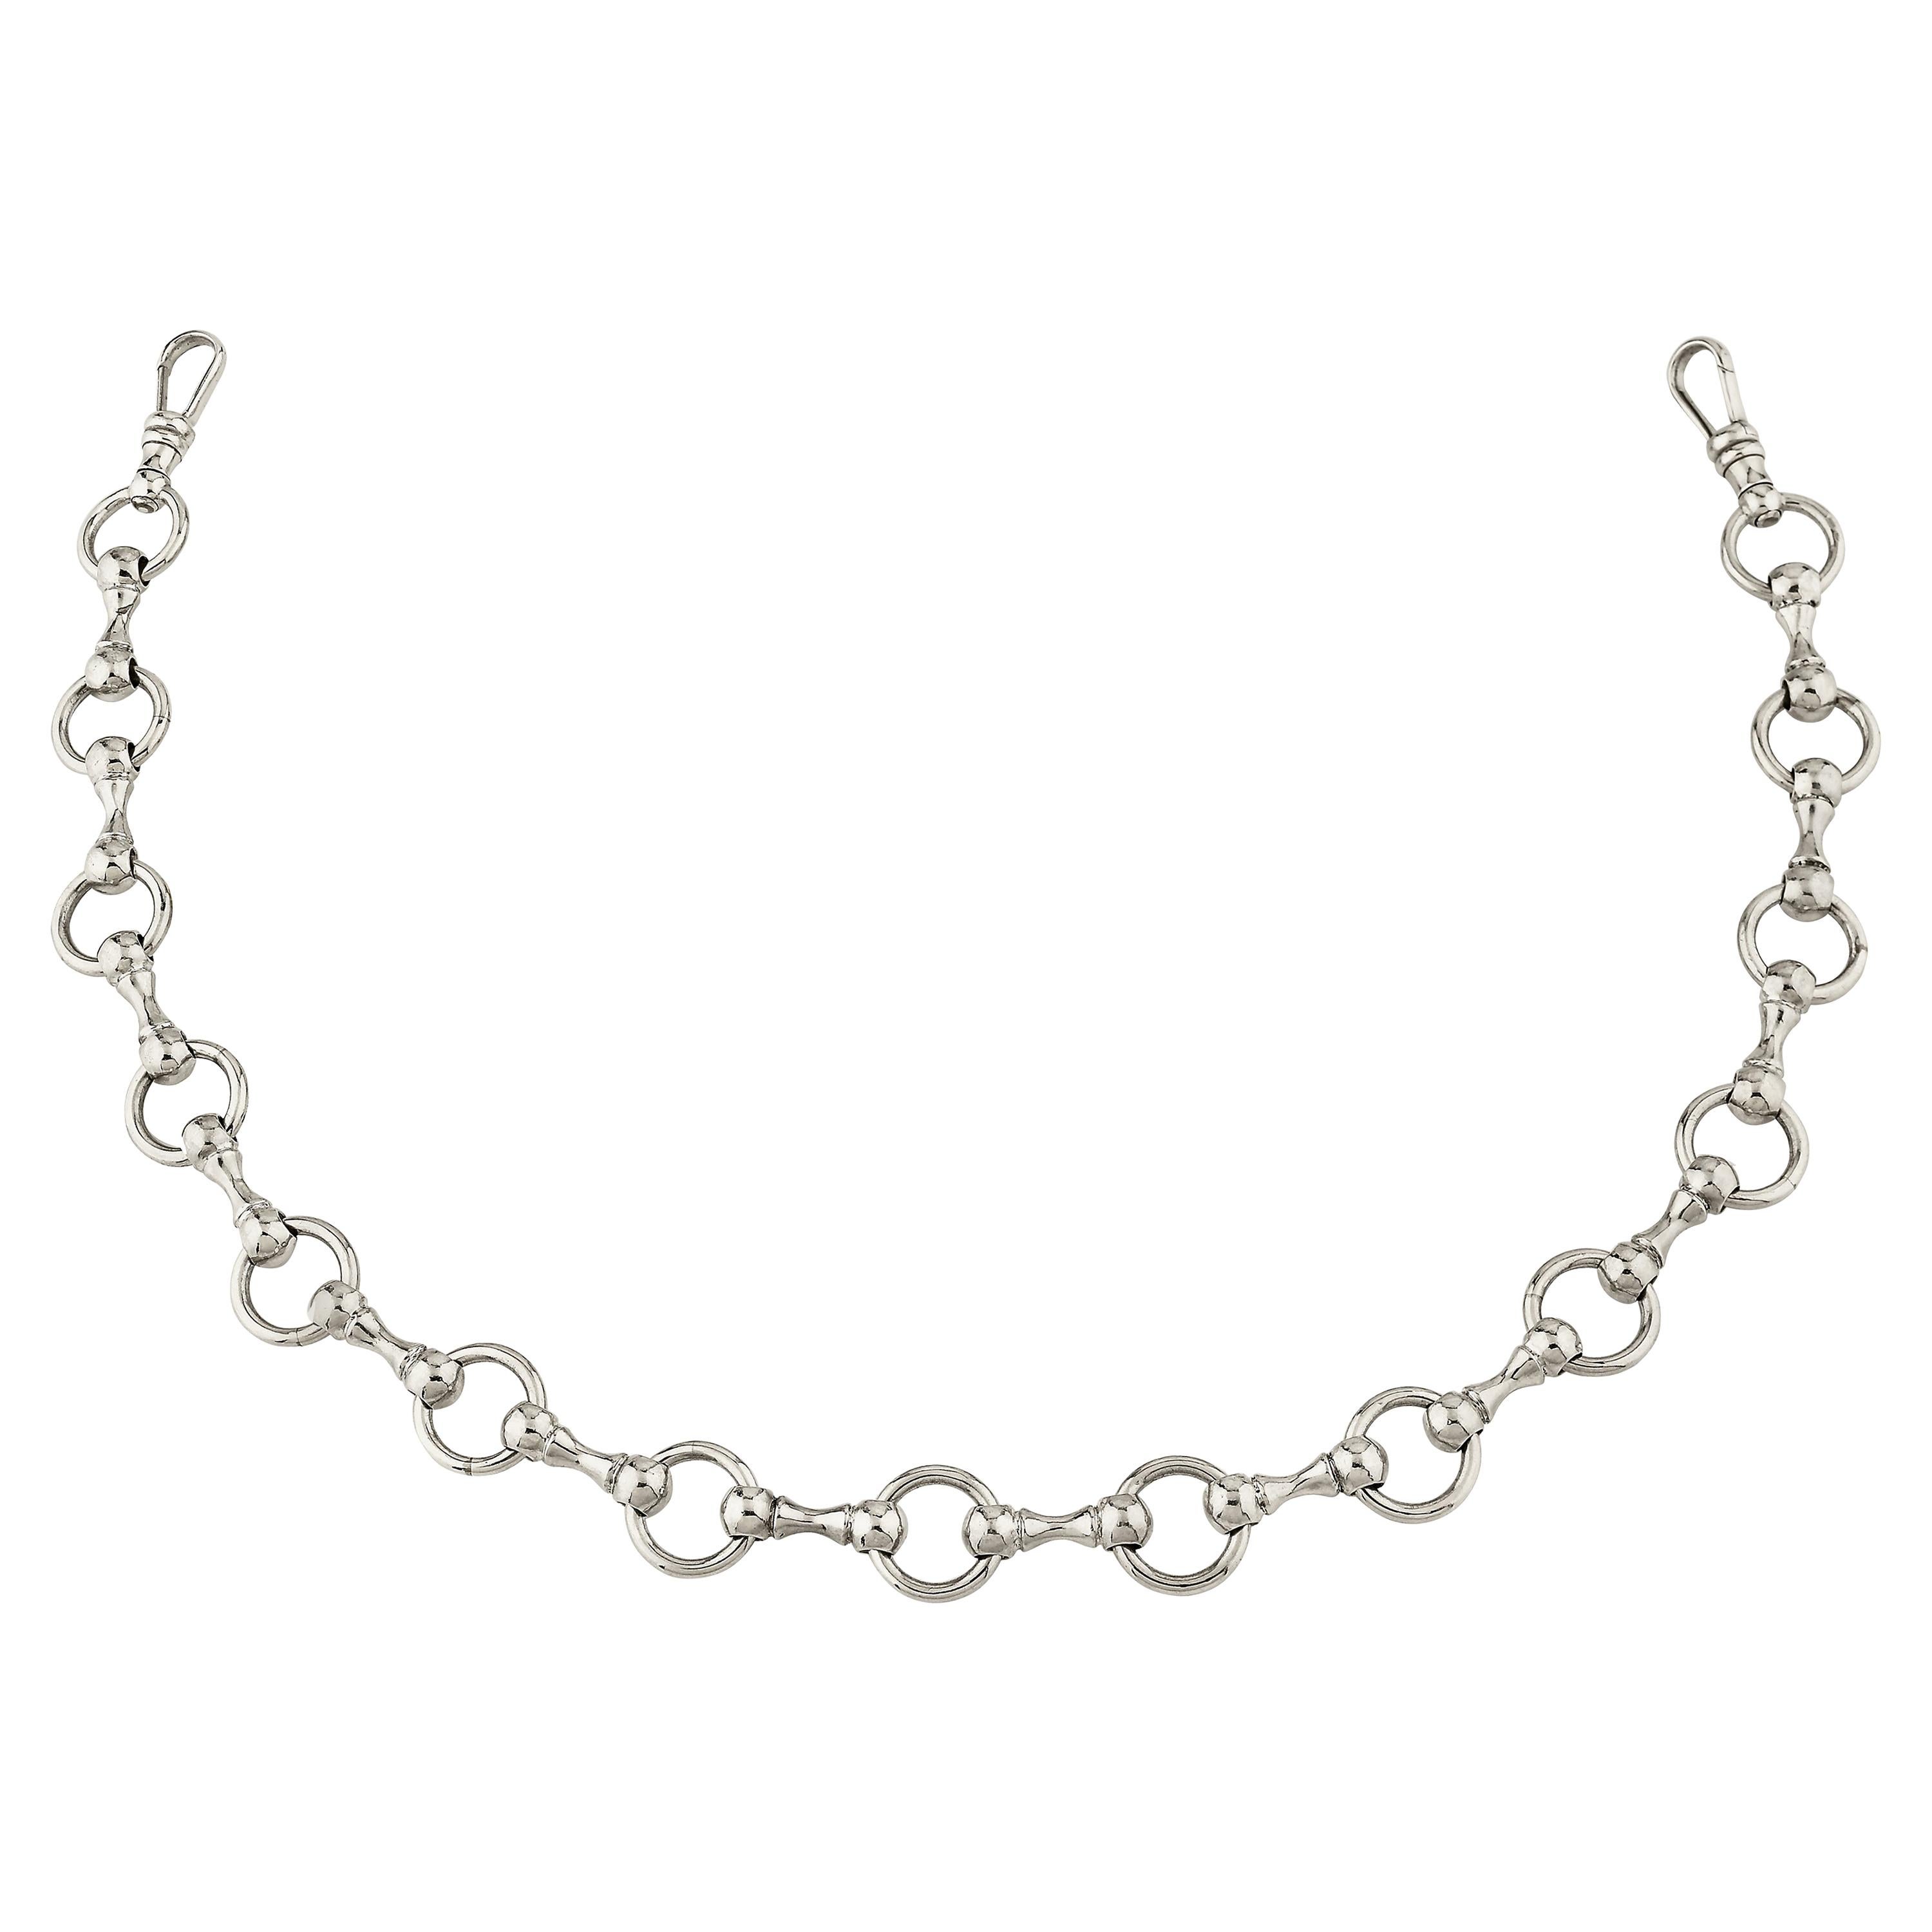 Betony Vernon "O'Ring Chain Medium Necklace" Sterling Silver 925 in Stock For Sale